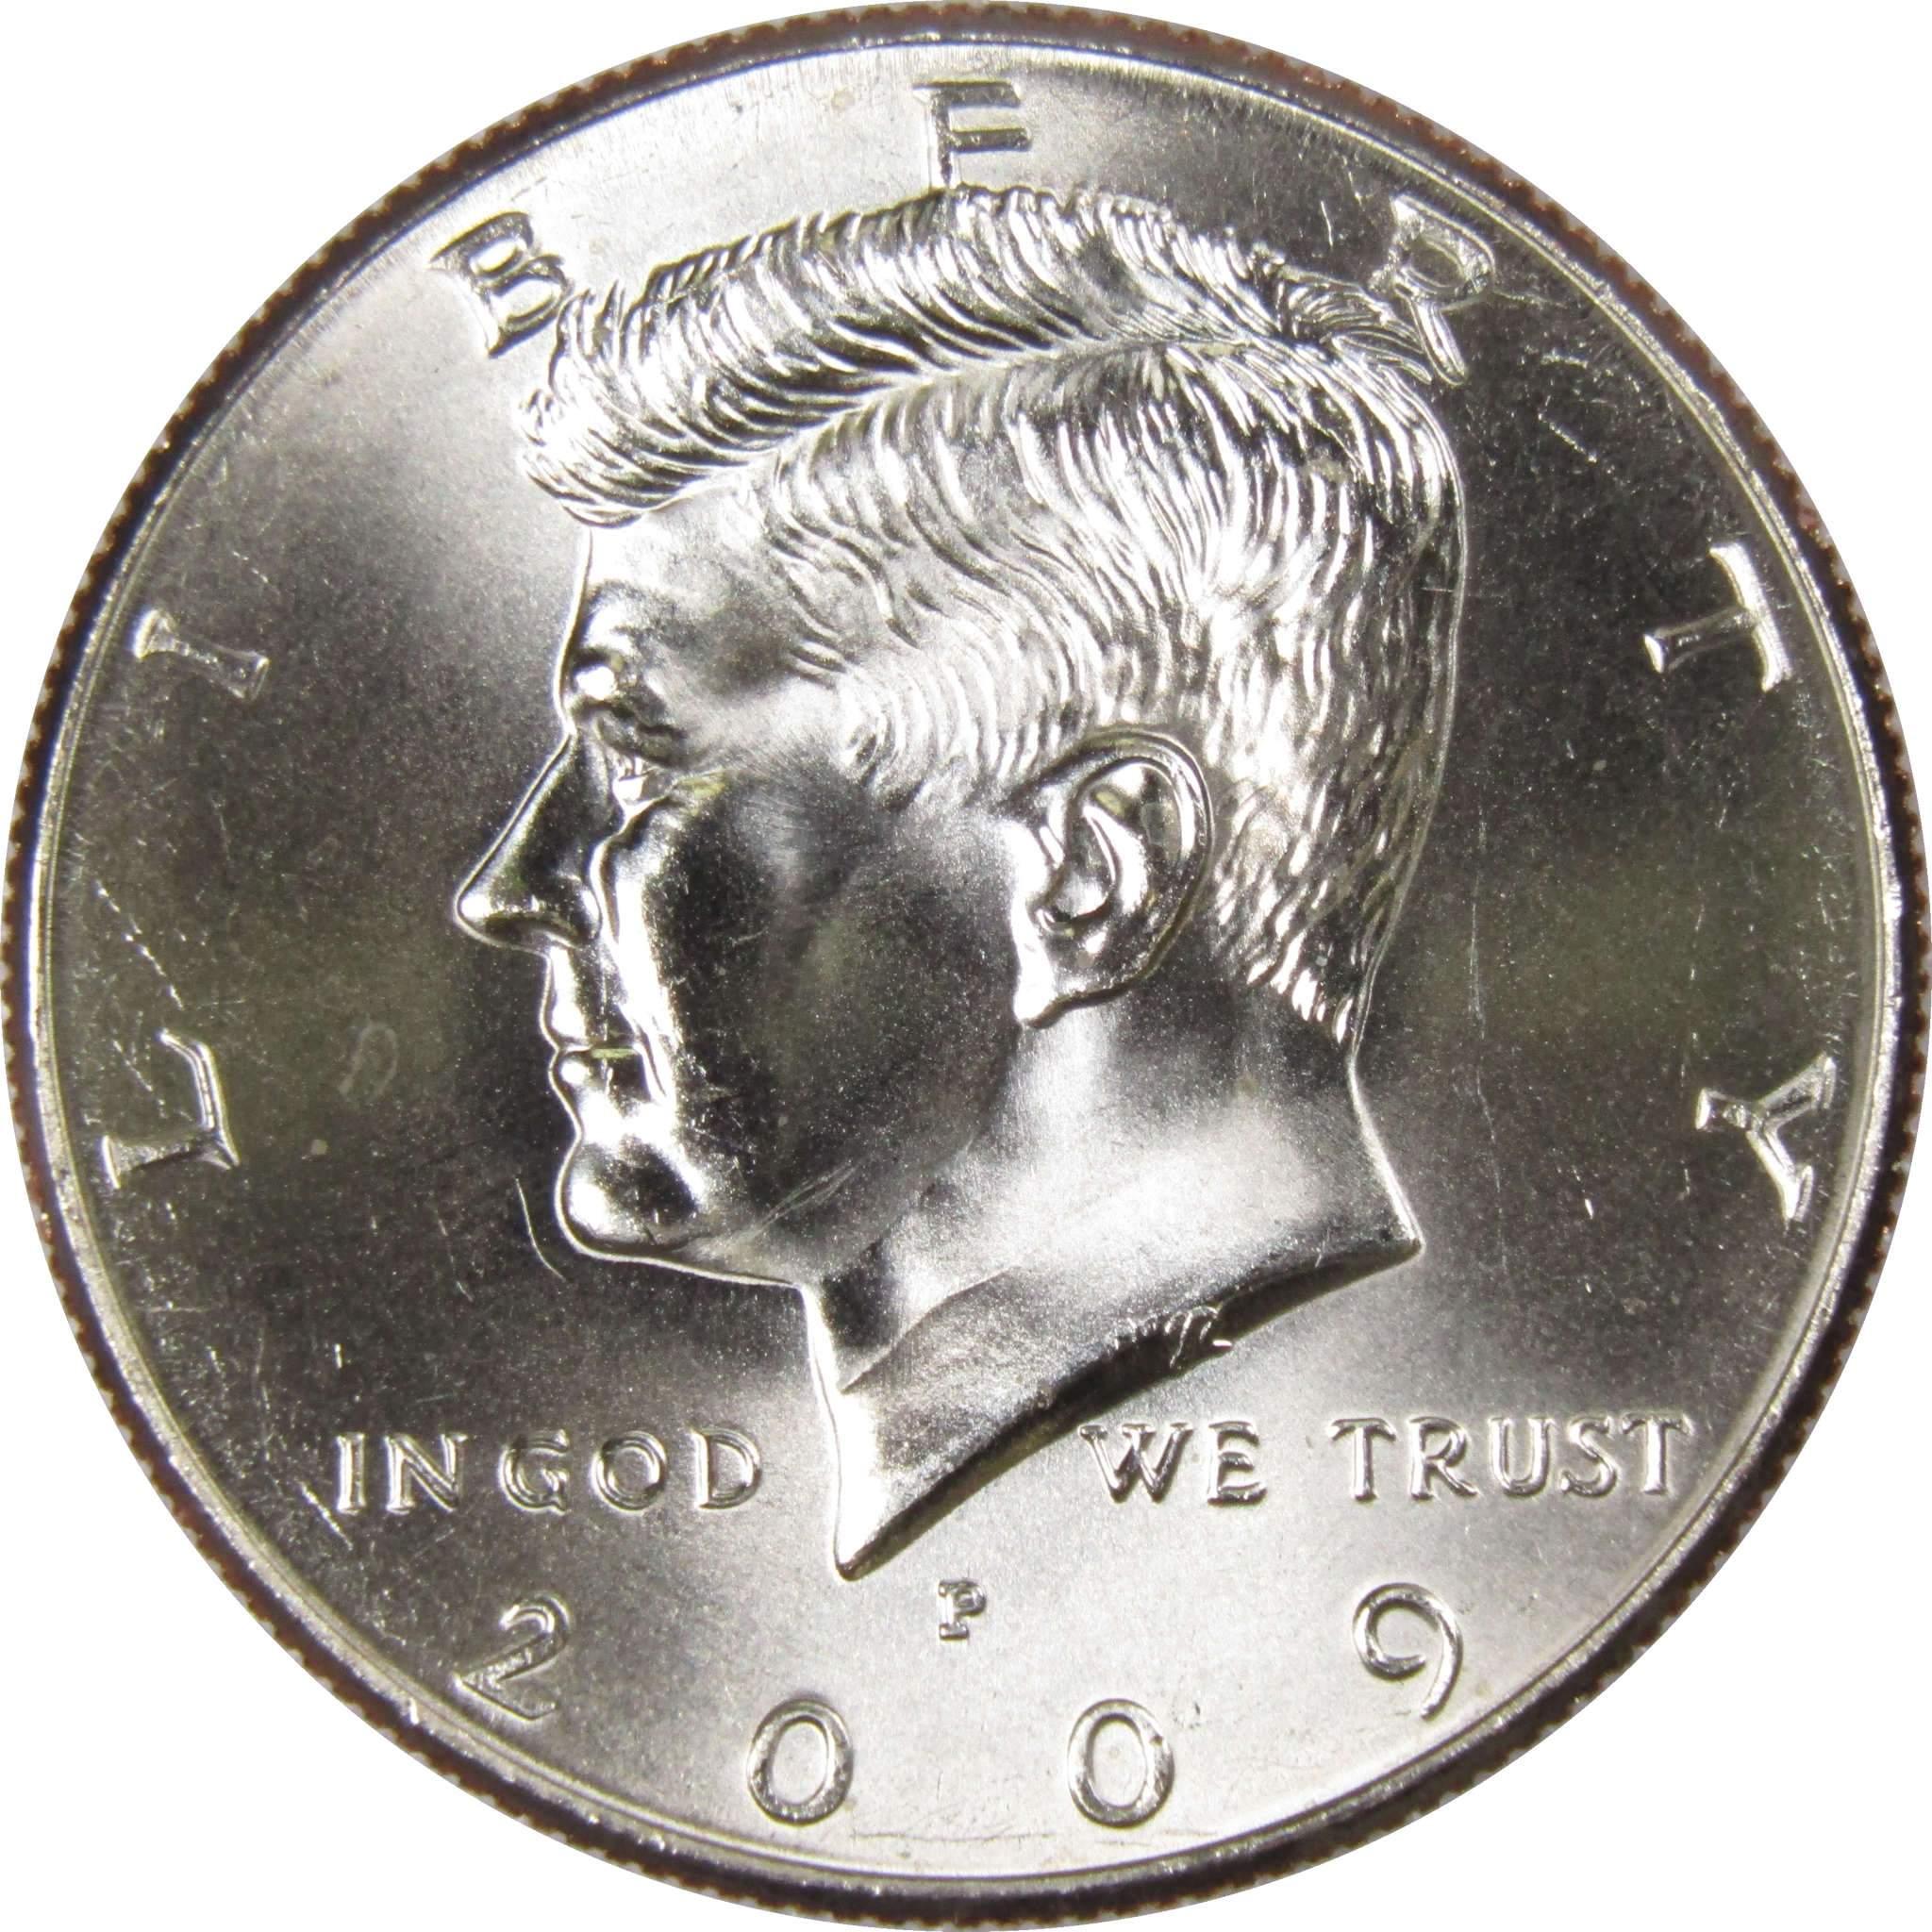 2009 P Kennedy Half Dollar BU Uncirculated Mint State 50c US Coin Collectible